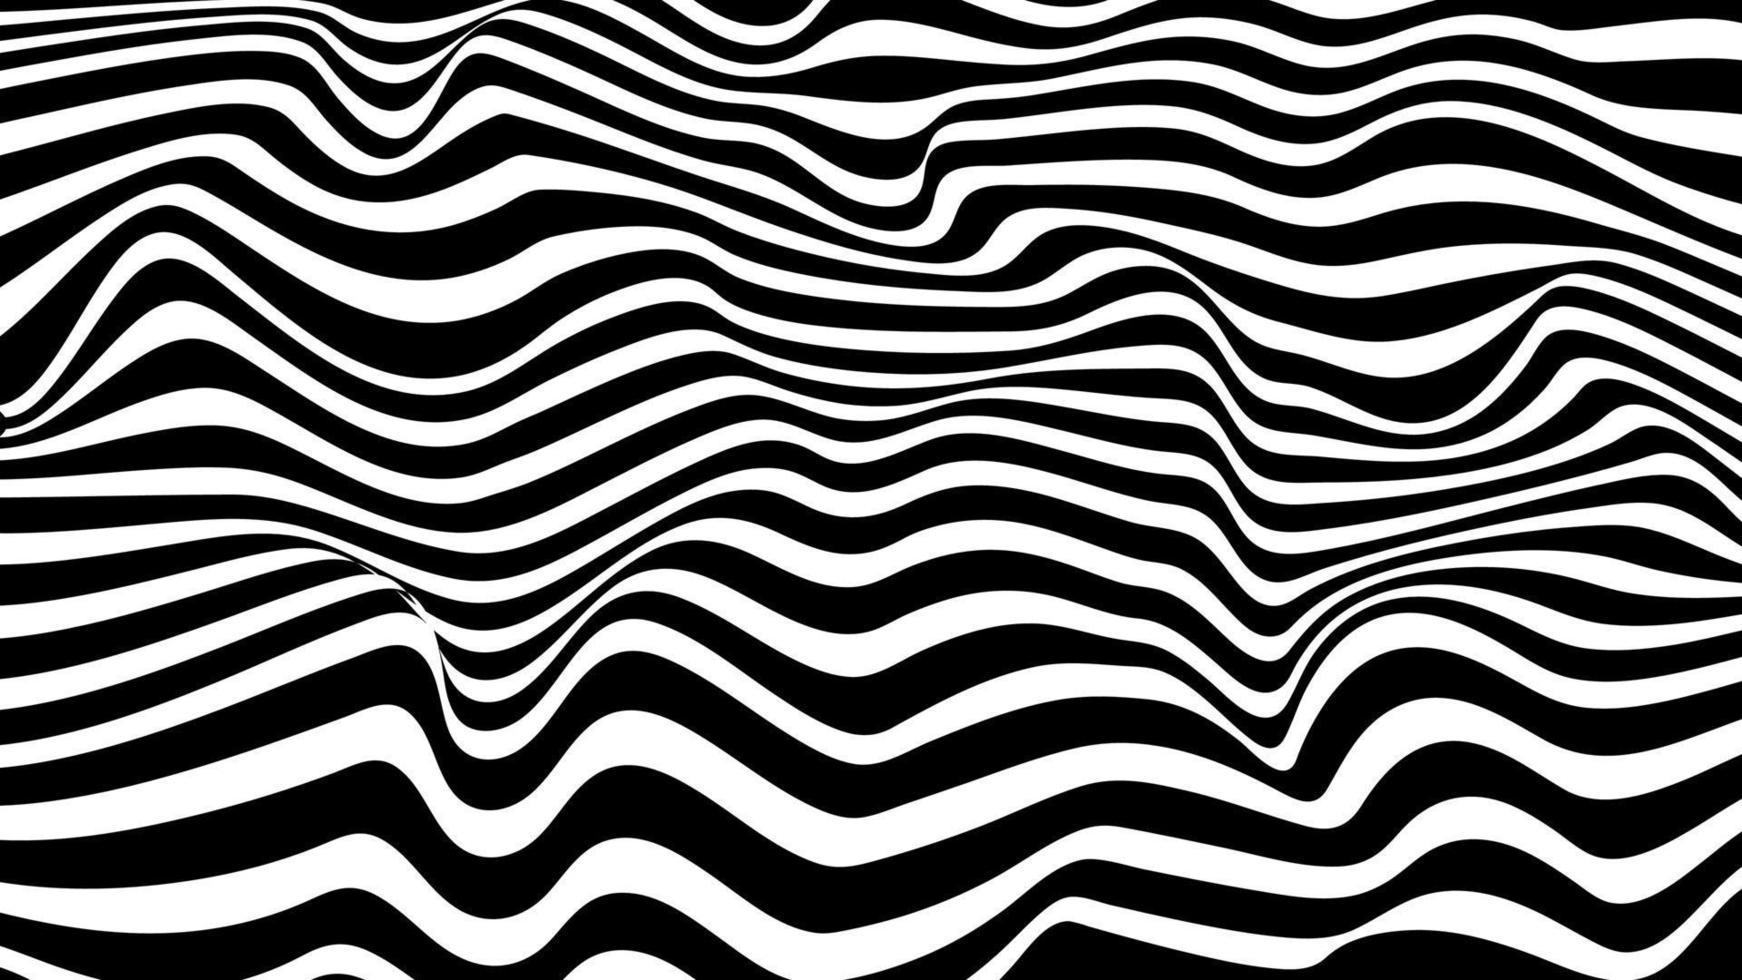 Squiggly Lines Wallpapers - Top Free Squiggly Lines Backgrounds ...